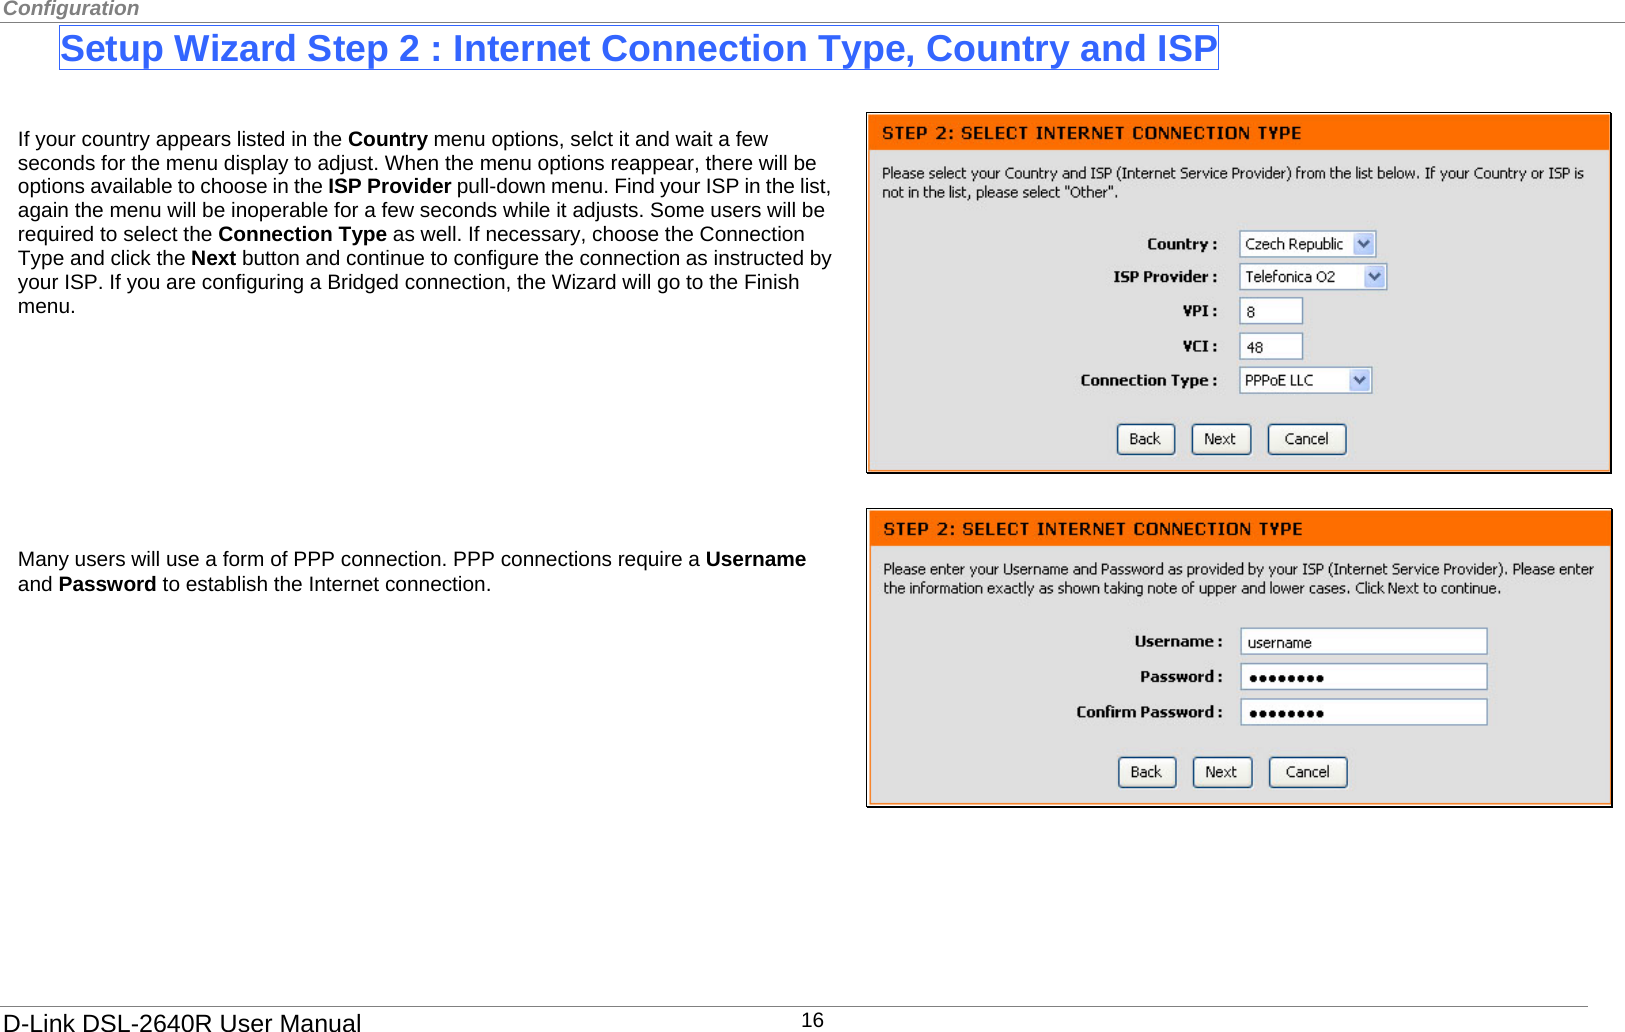 Configuration  Setup Wizard Step 2 : Internet Connection Type, Country and ISP   If your country appears listed in the Country menu options, selct it and wait a few seconds for the menu display to adjust. When the menu options reappear, there will be options available to choose in the ISP Provider pull-down menu. Find your ISP in the list, again the menu will be inoperable for a few seconds while it adjusts. Some users will be required to select the Connection Type as well. If necessary, choose the Connection Type and click the Next button and continue to configure the connection as instructed by your ISP. If you are configuring a Bridged connection, the Wizard will go to the Finish menu.         Many users will use a form of PPP connection. PPP connections require a Username and Password to establish the Internet connection.              D-Link DSL-2640R User Manual 16